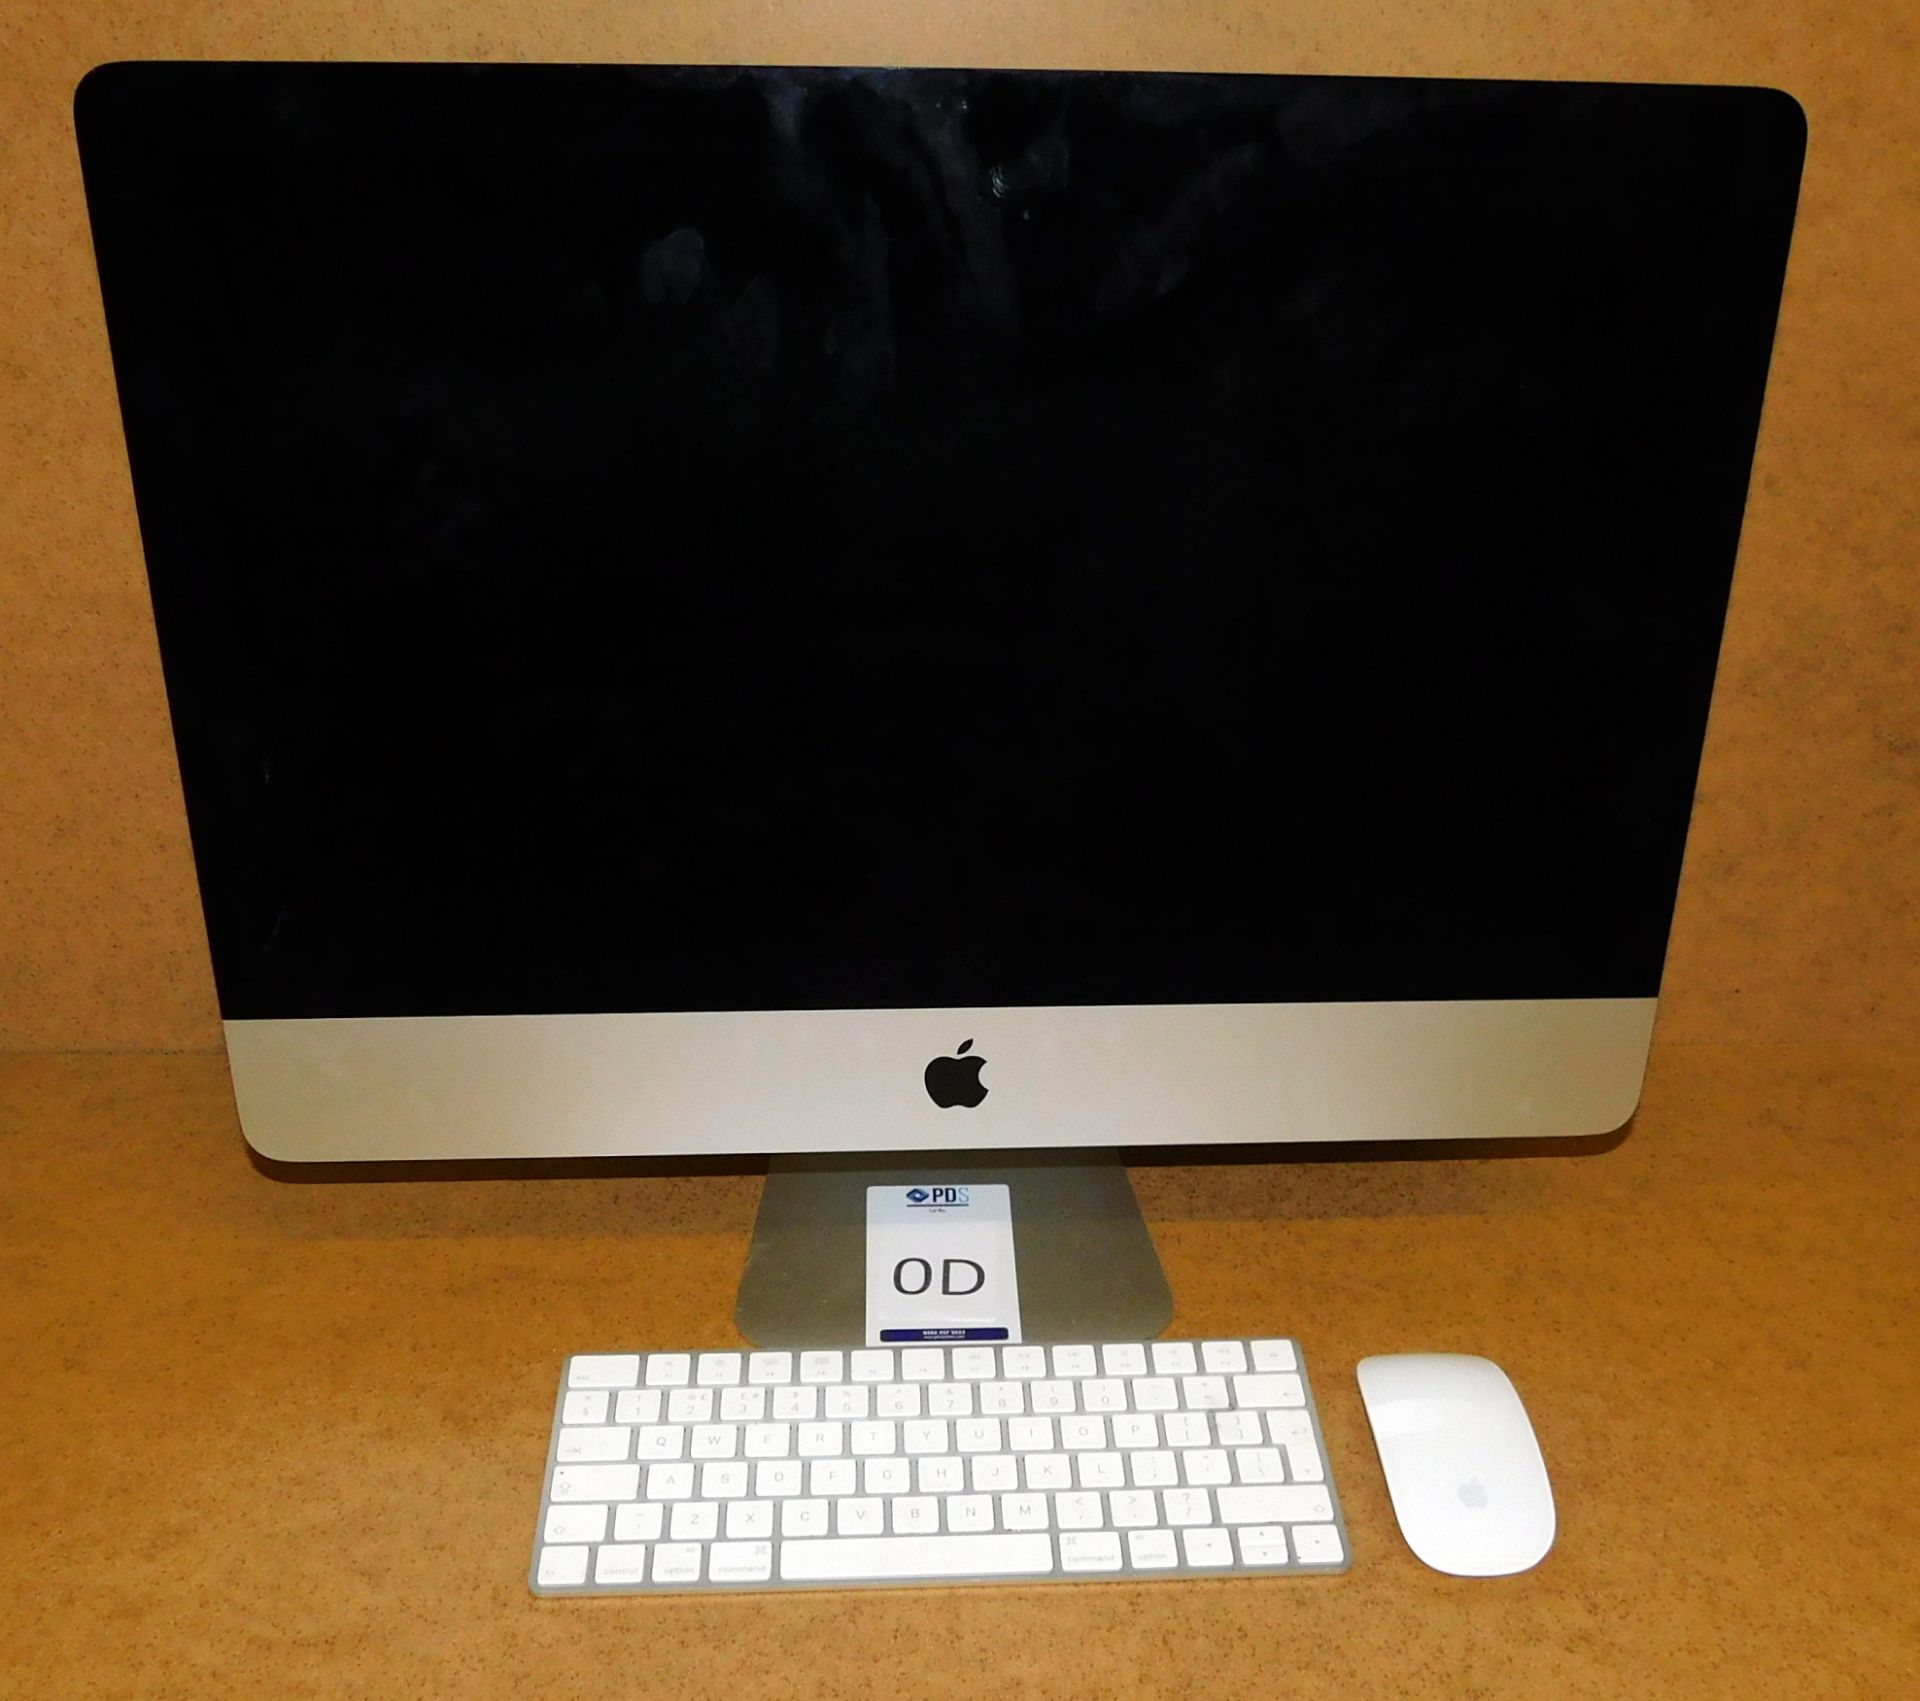 Apple A1418 imac, Core i5, 2.7ghz, 21.5inch , 1 TB HDD, 8gb RAM with Keyboard and Mouse, serial